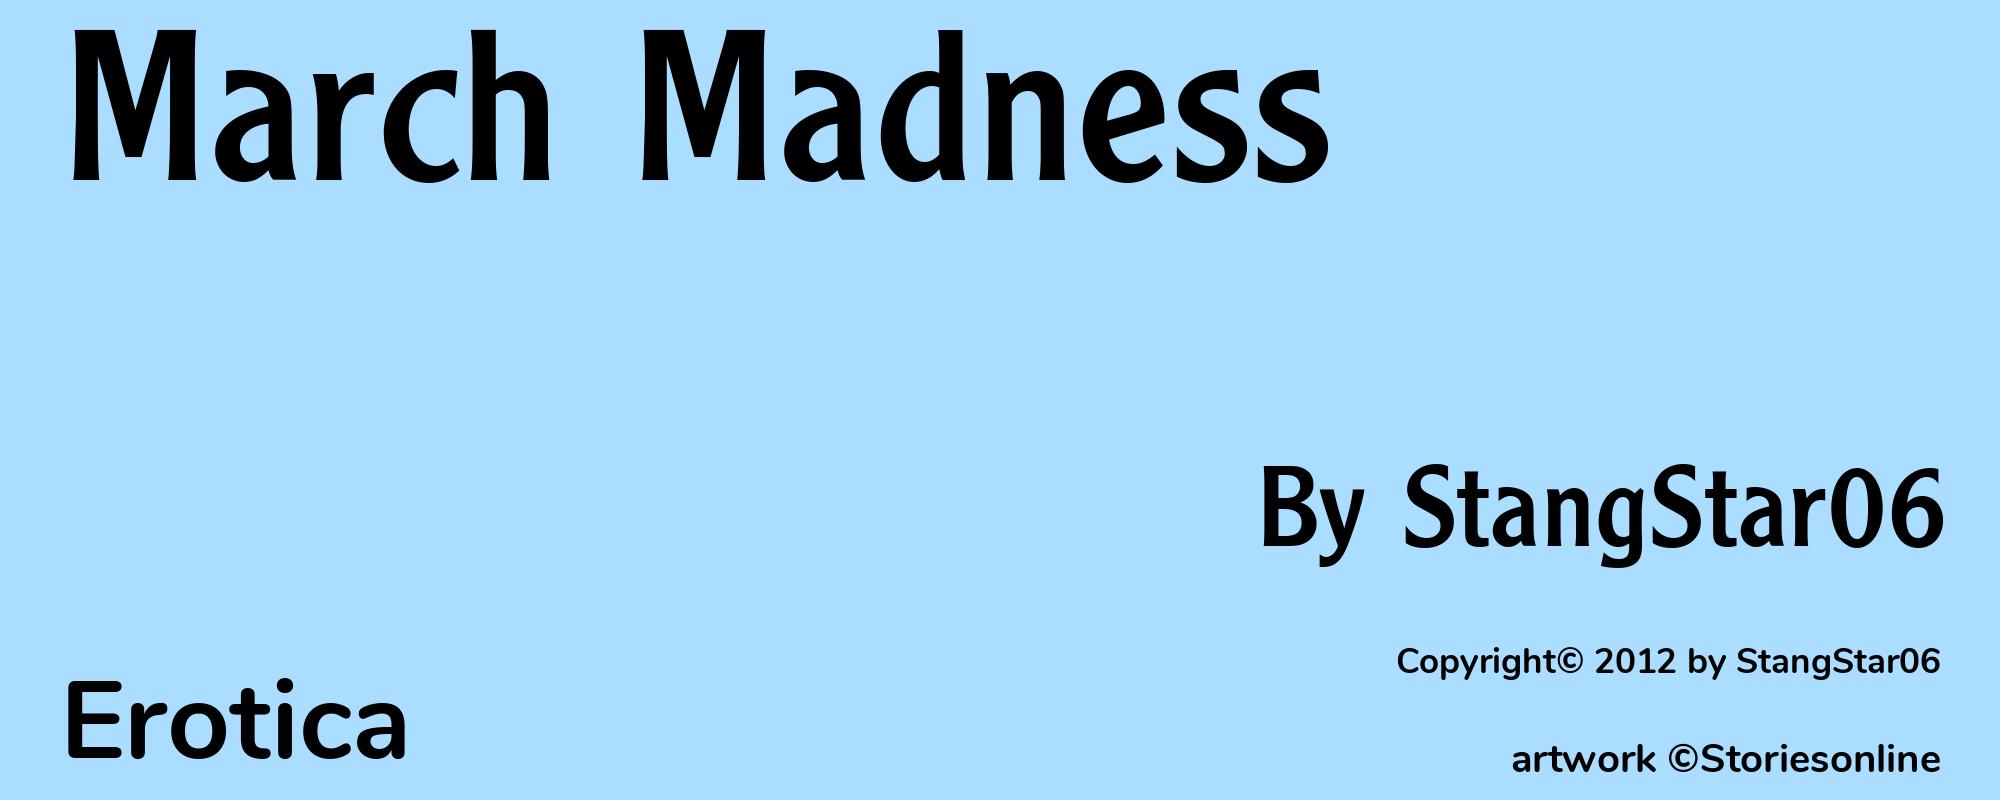 March Madness - Cover